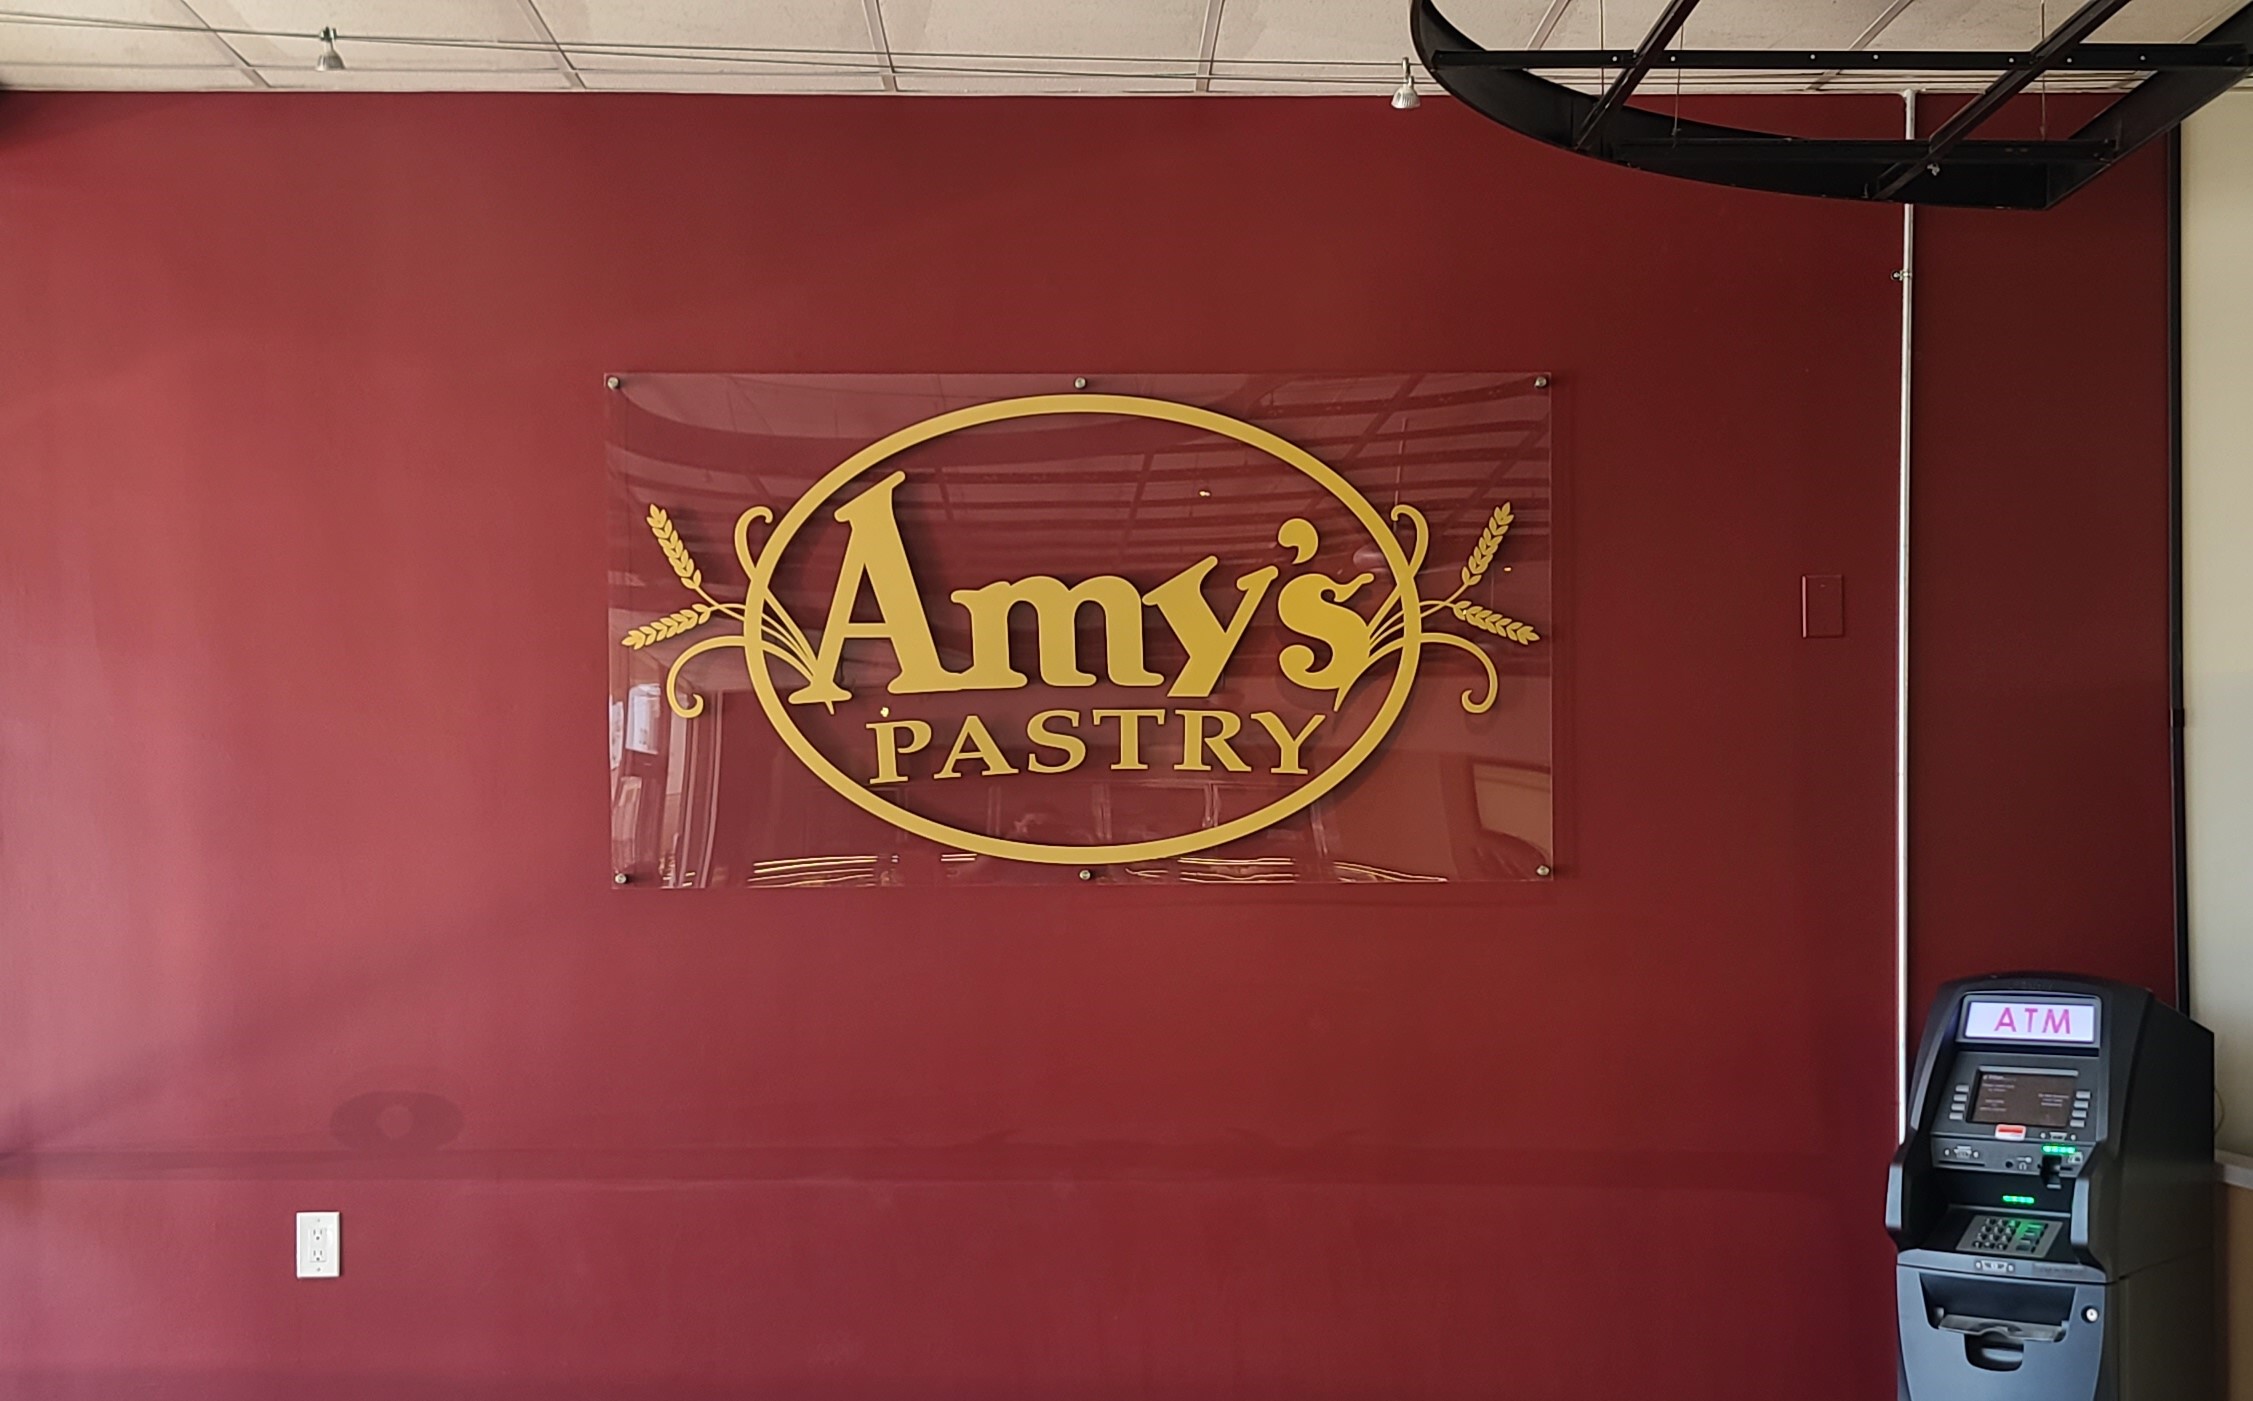 This beautiful panel sign for Amy's Pastry in Montebello completes their establishment and will impress customers as they enter the bakeshop.